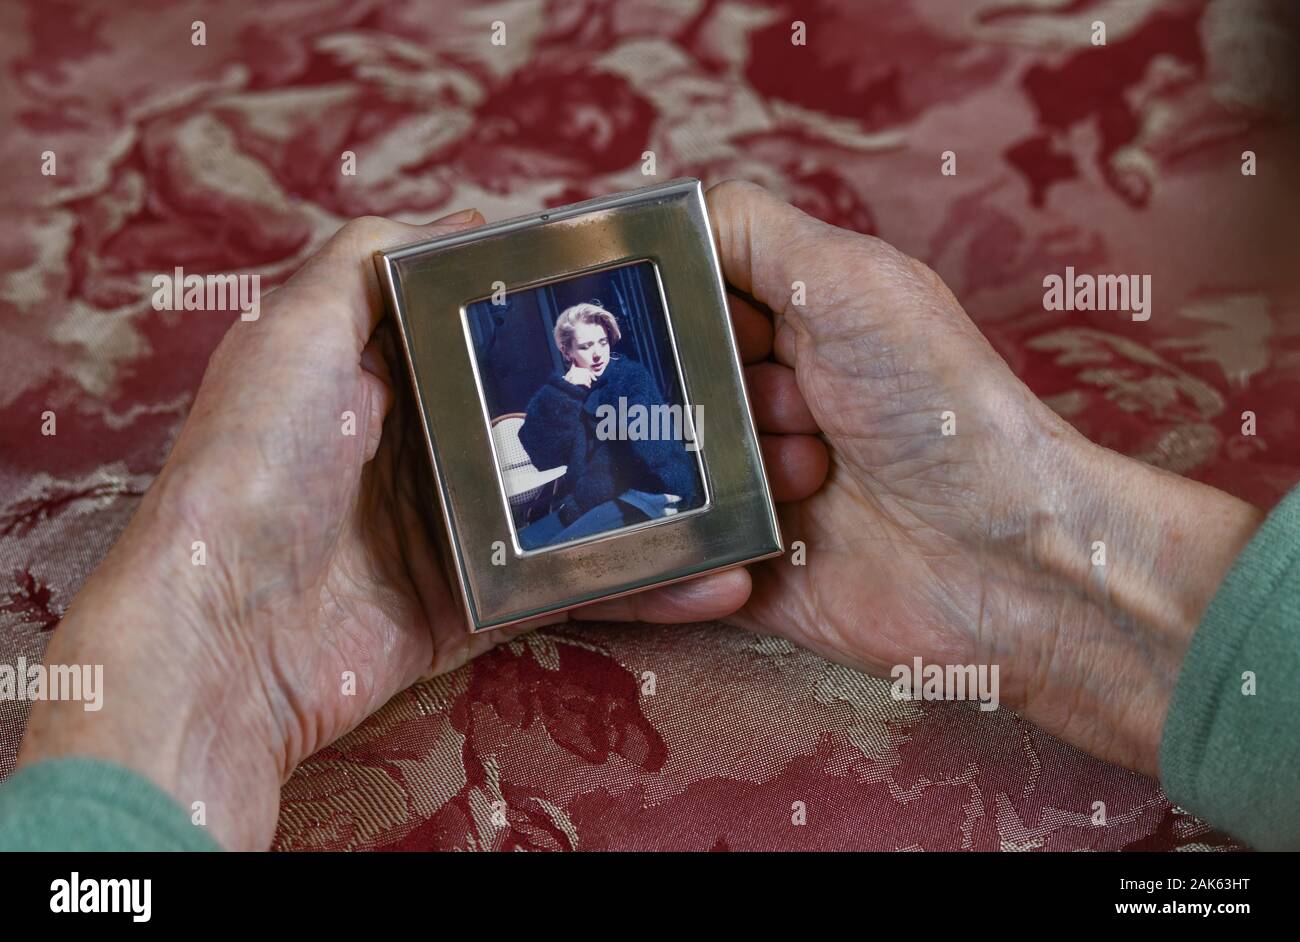 Symbol photo, mother love, hands of an old woman holding picture frame with a young woman, daughter, memory, Germany Stock Photo